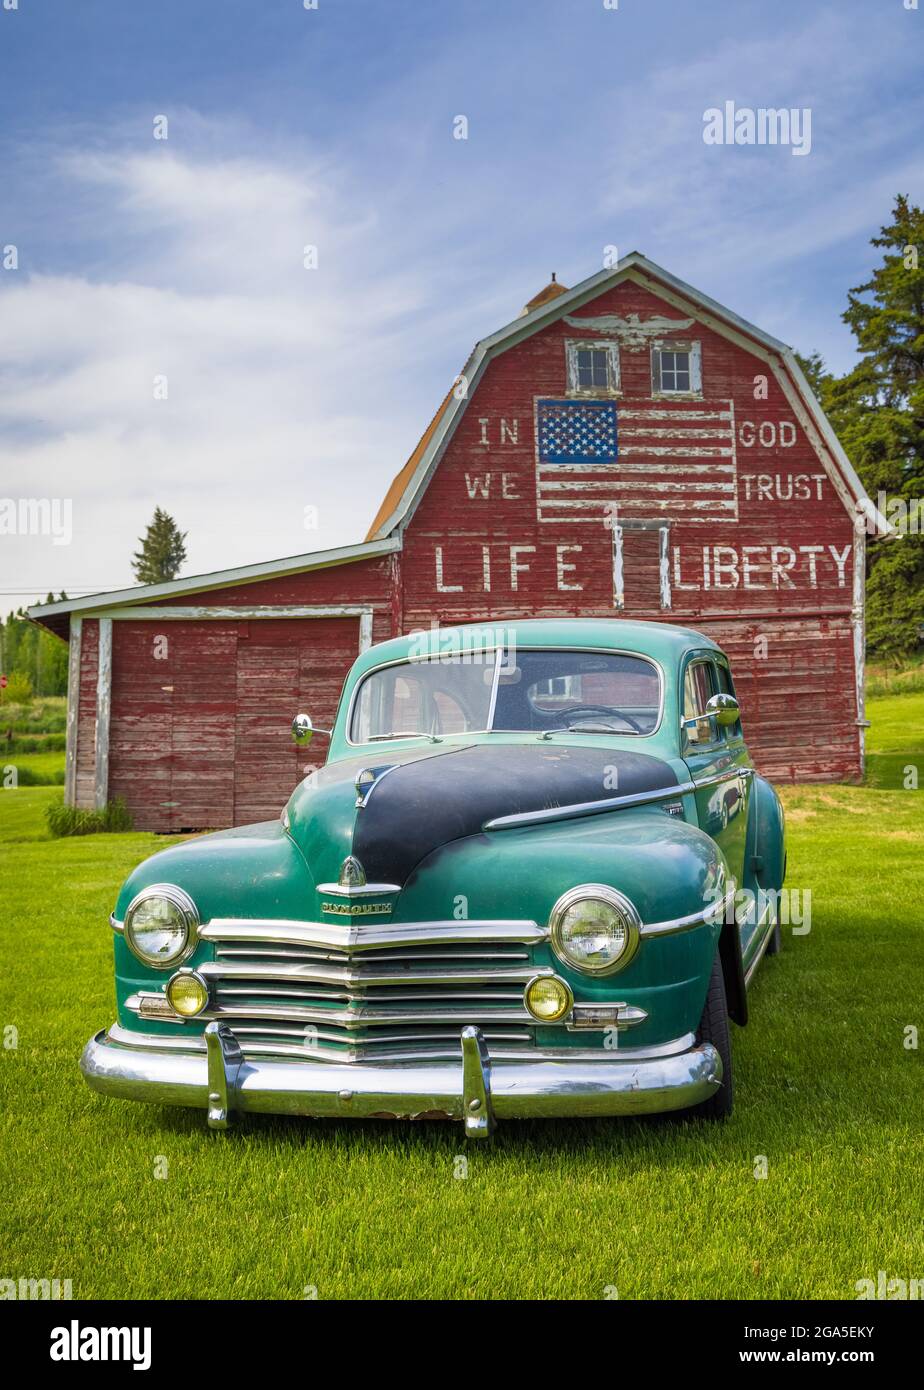 Vintage car in front of the 'In god we trust' barn in Latah, a town in Spokane County, Washington, United States Stock Photo